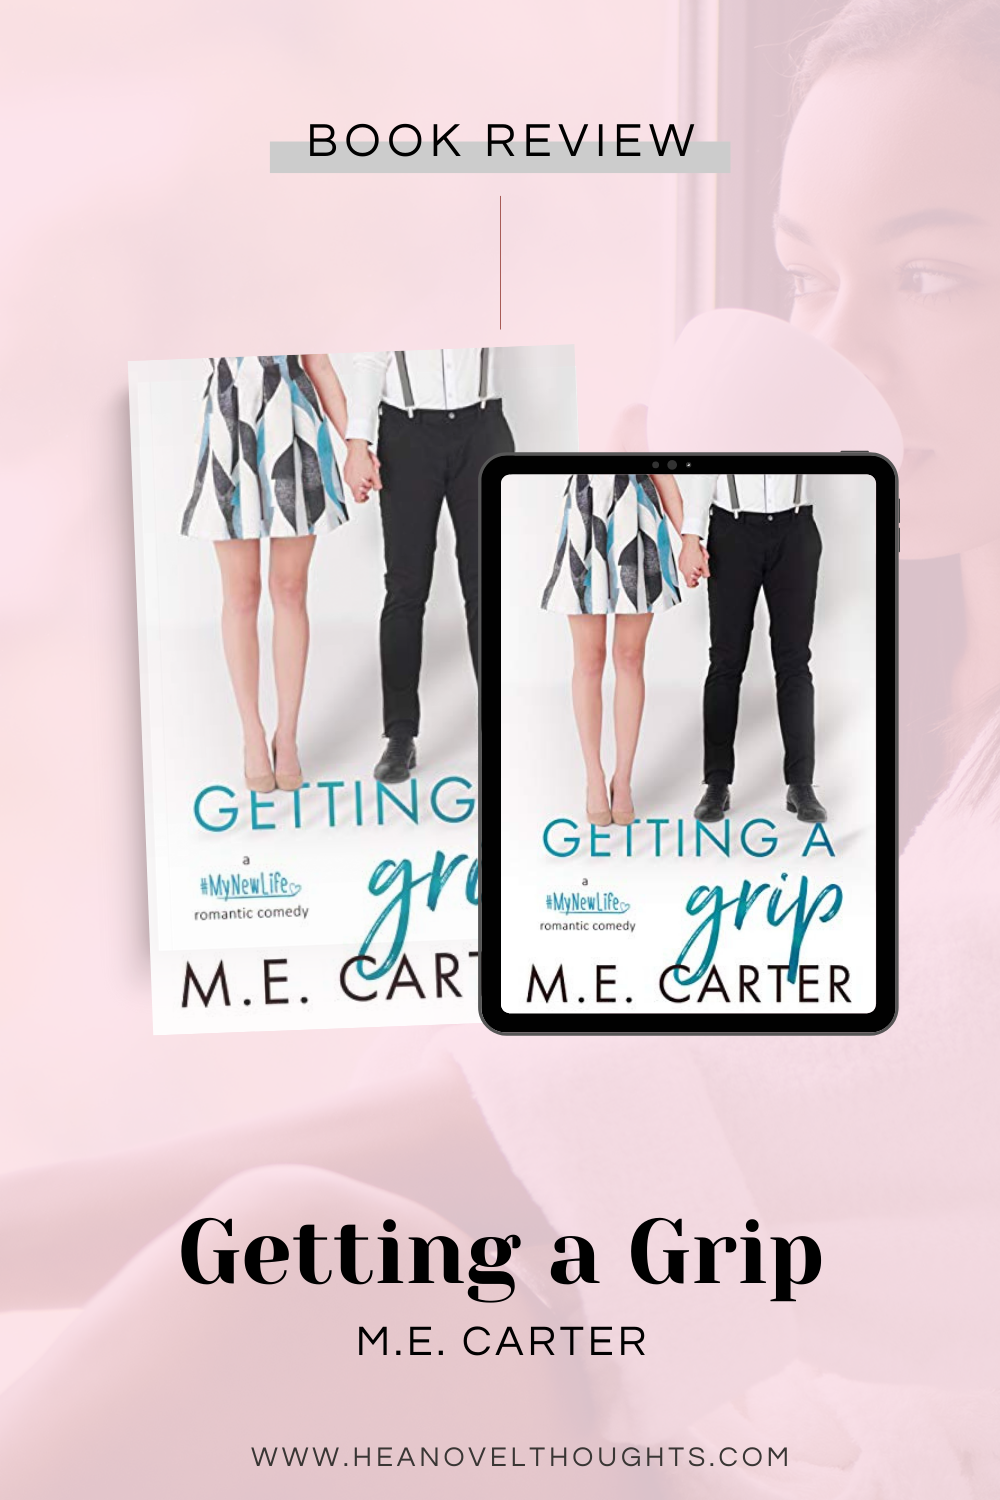 Getting A Grip by M.E. Carter